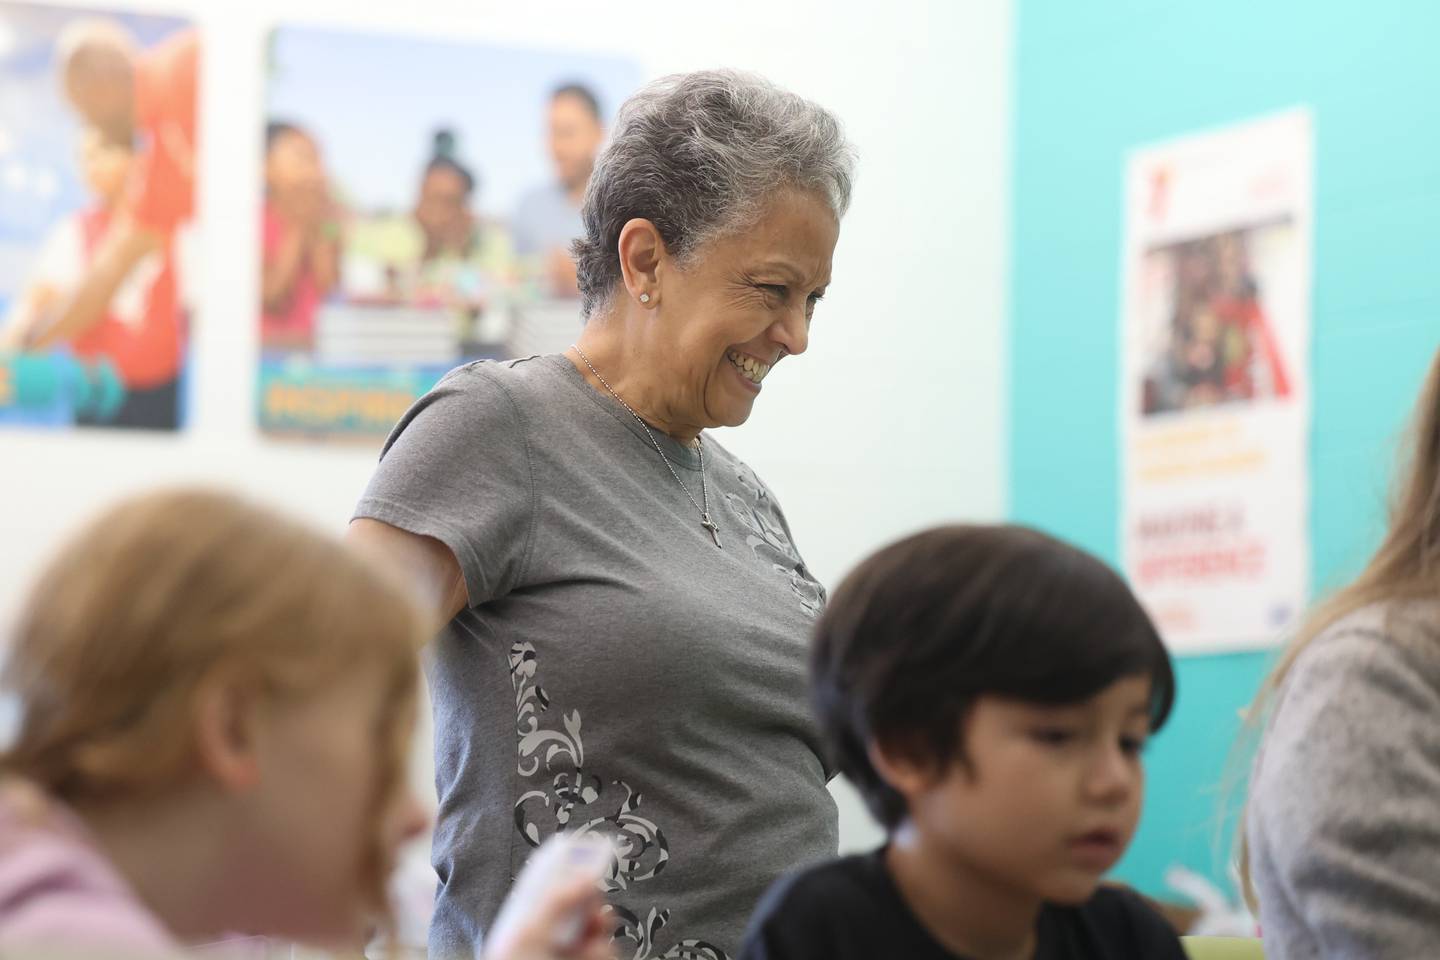 Volunteer Carmen Janega helps with the summer camp at the C.W. Avery YMCA in Plainfield. Wednesday, July 20, 2022 in Plainfield.